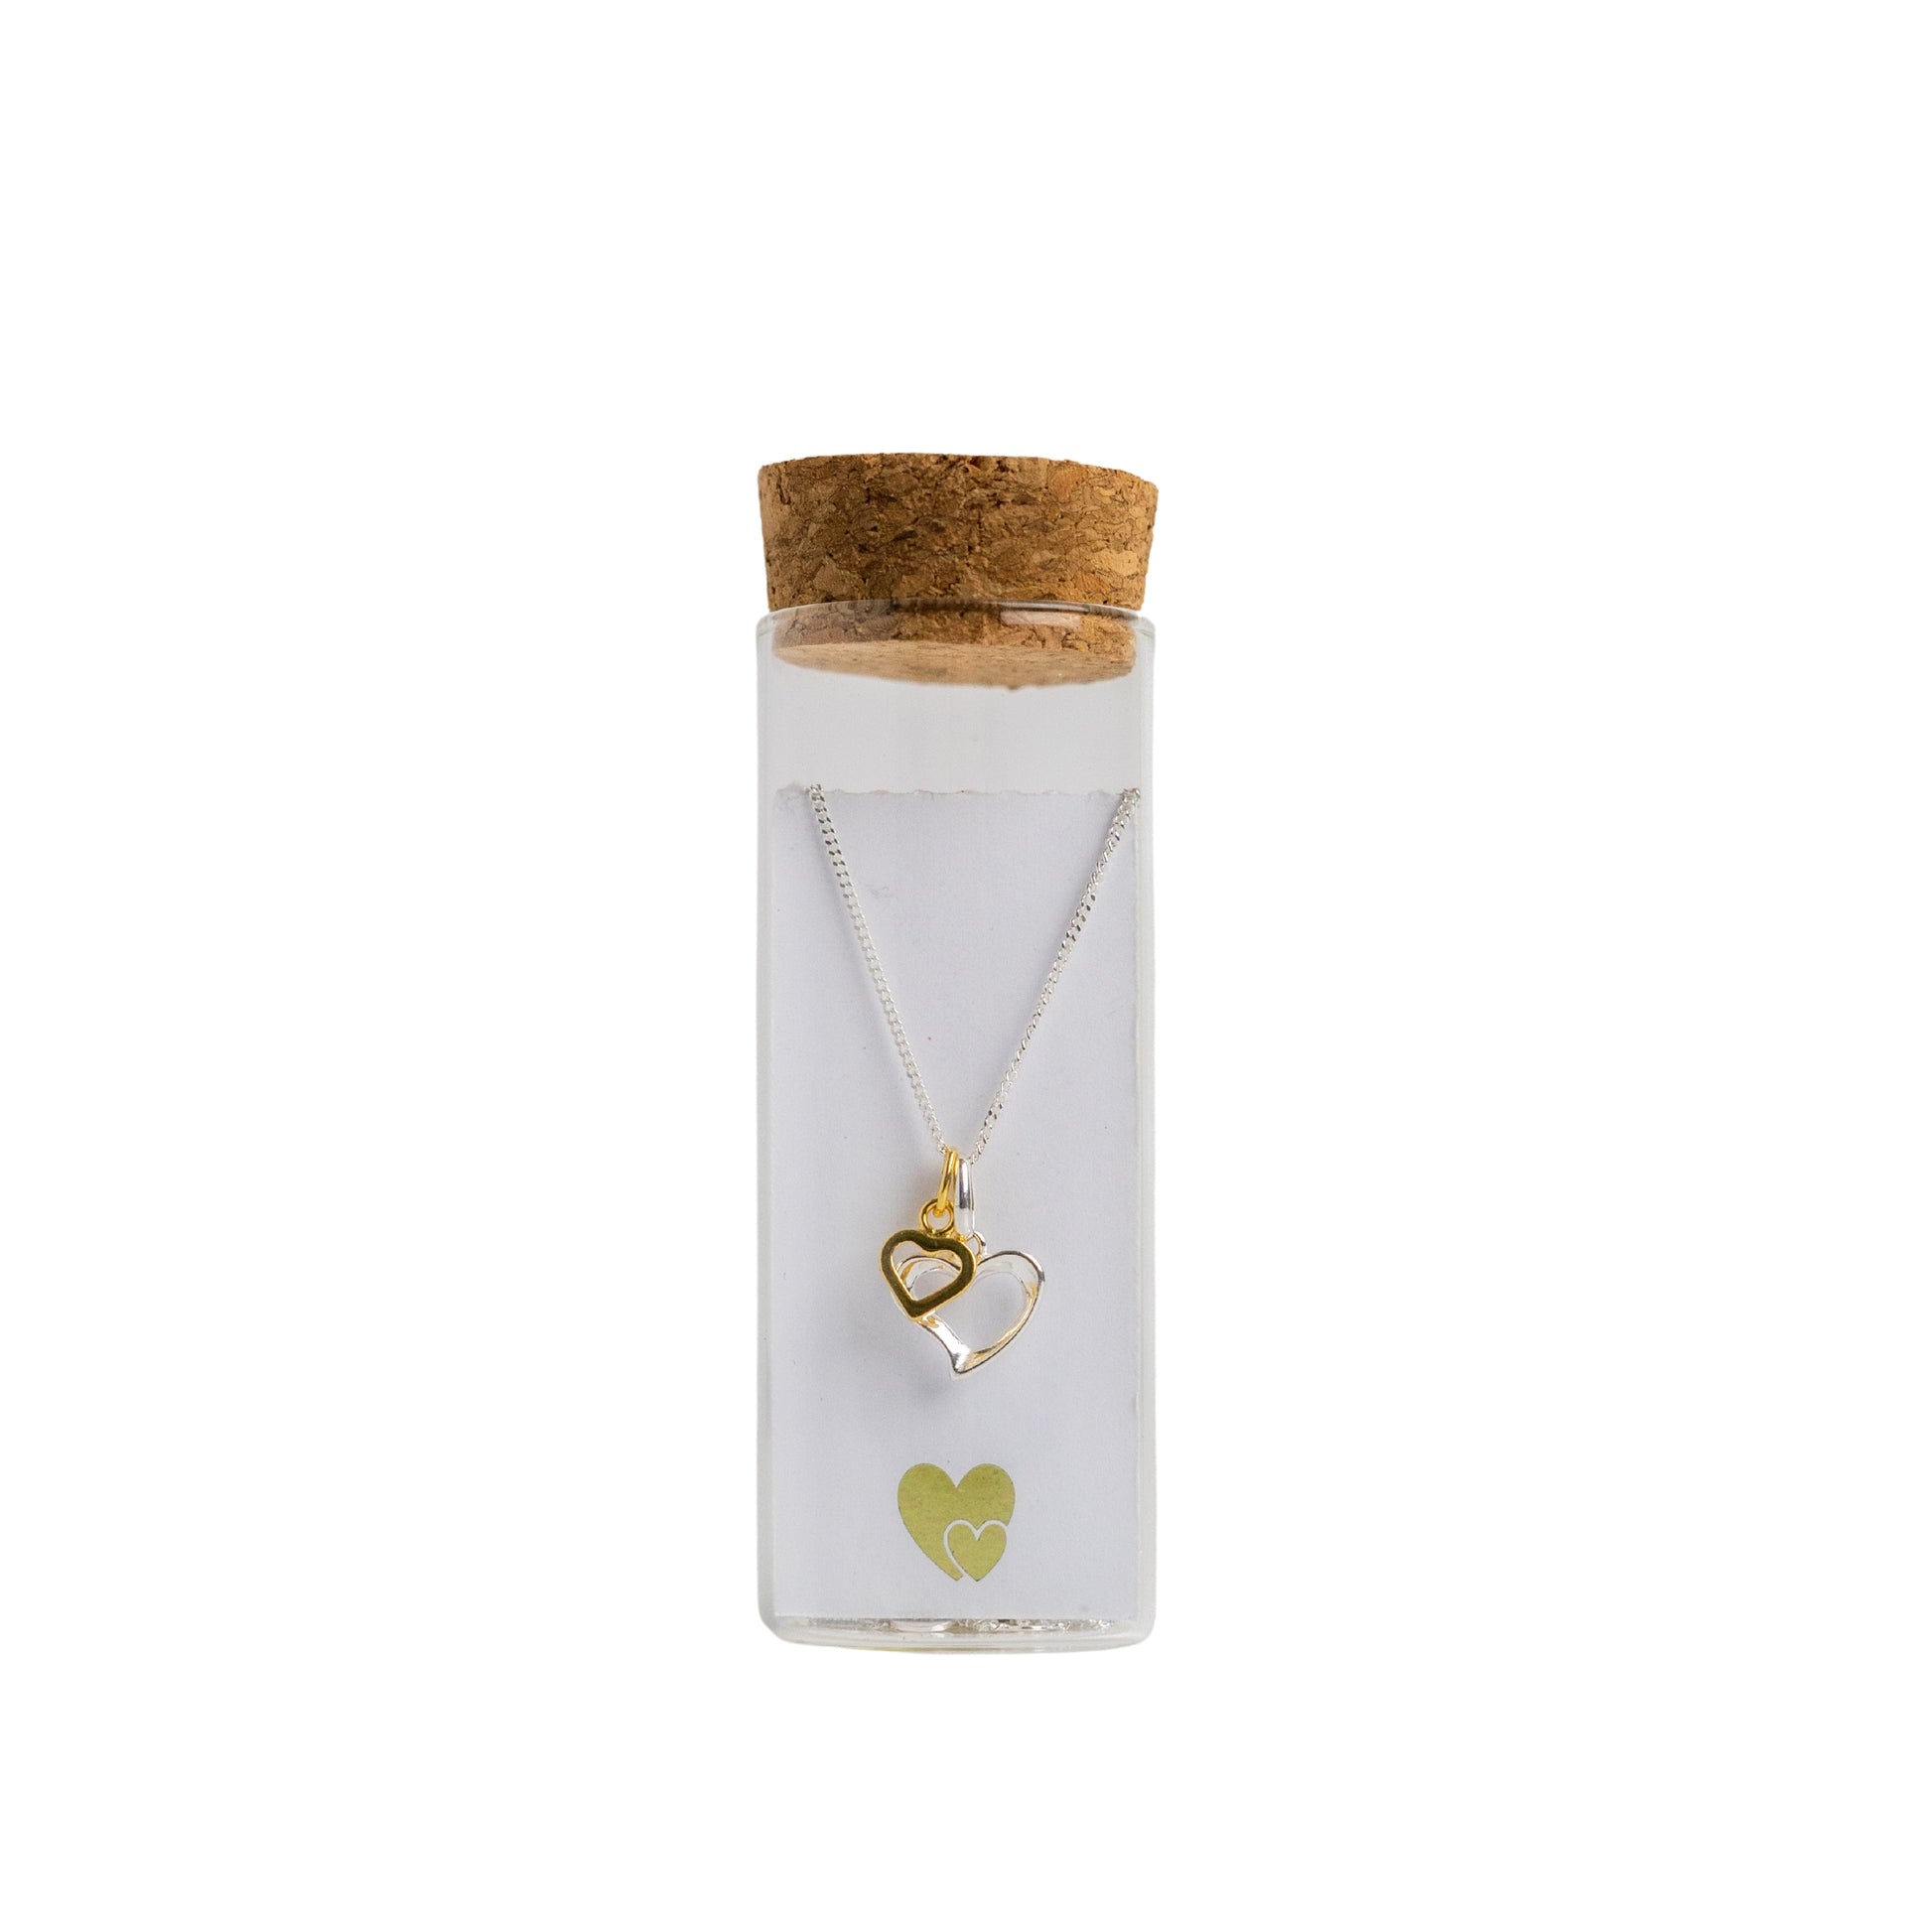 Message in a Bottle jewellery. A sterling silver heart is twinned with a smaller gold vermeil heart and suspended from a 16-18" sterling silver chain. The necklace is placed in a small glass bottle that includes a scroll personalised with a message of your choice.